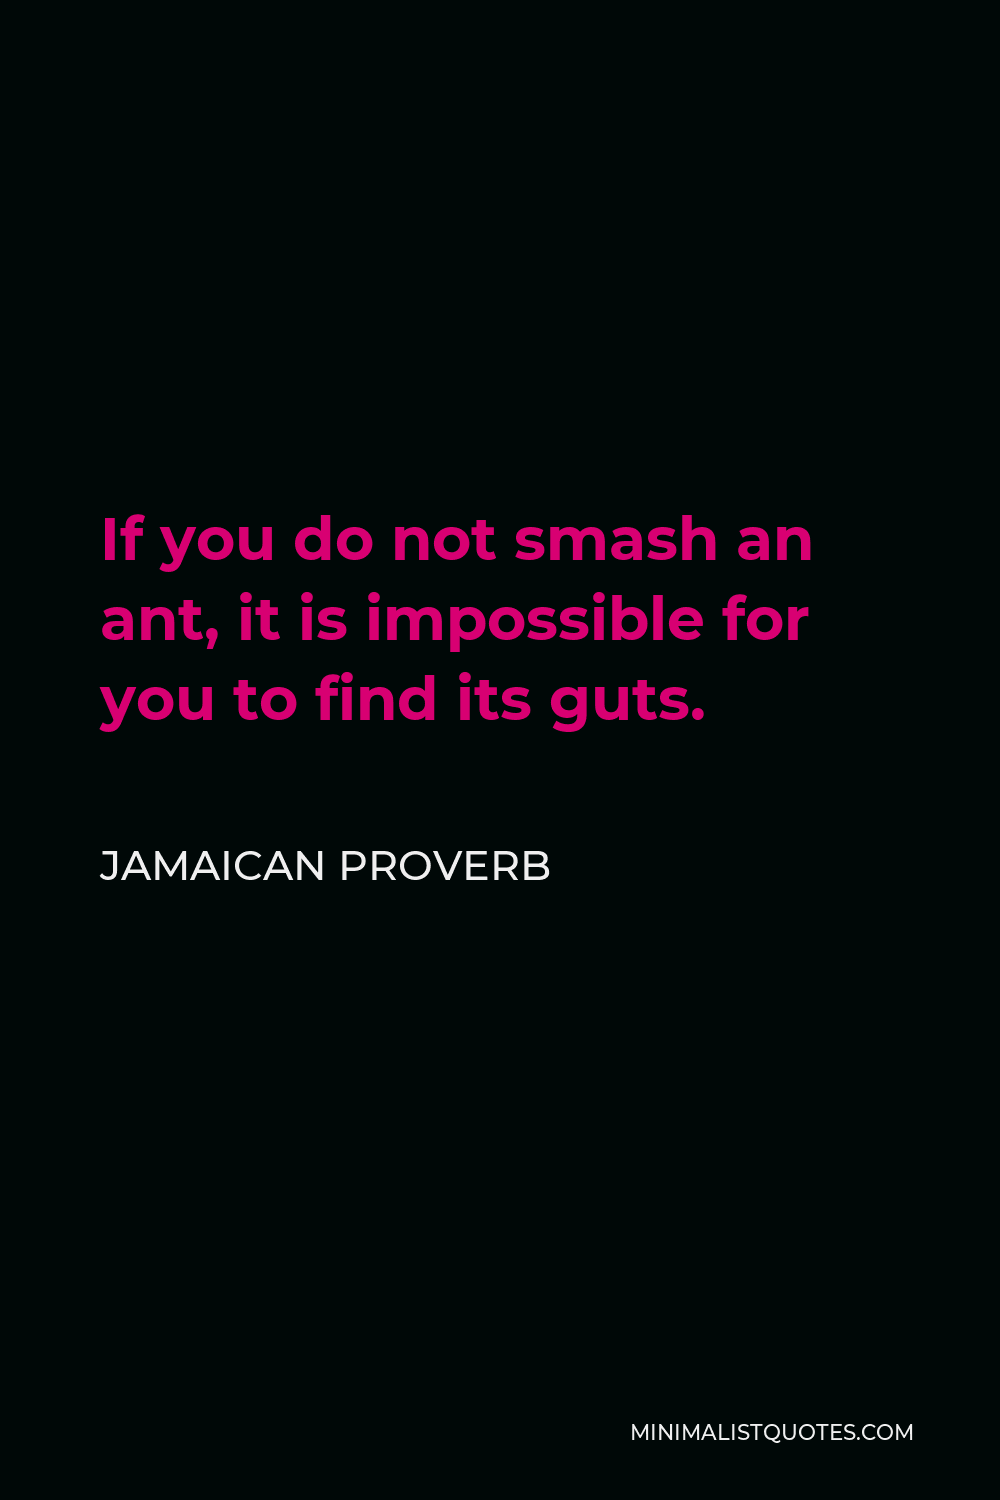 Jamaican Proverb Quote - If you do not smash an ant, it is impossible for you to find its guts.